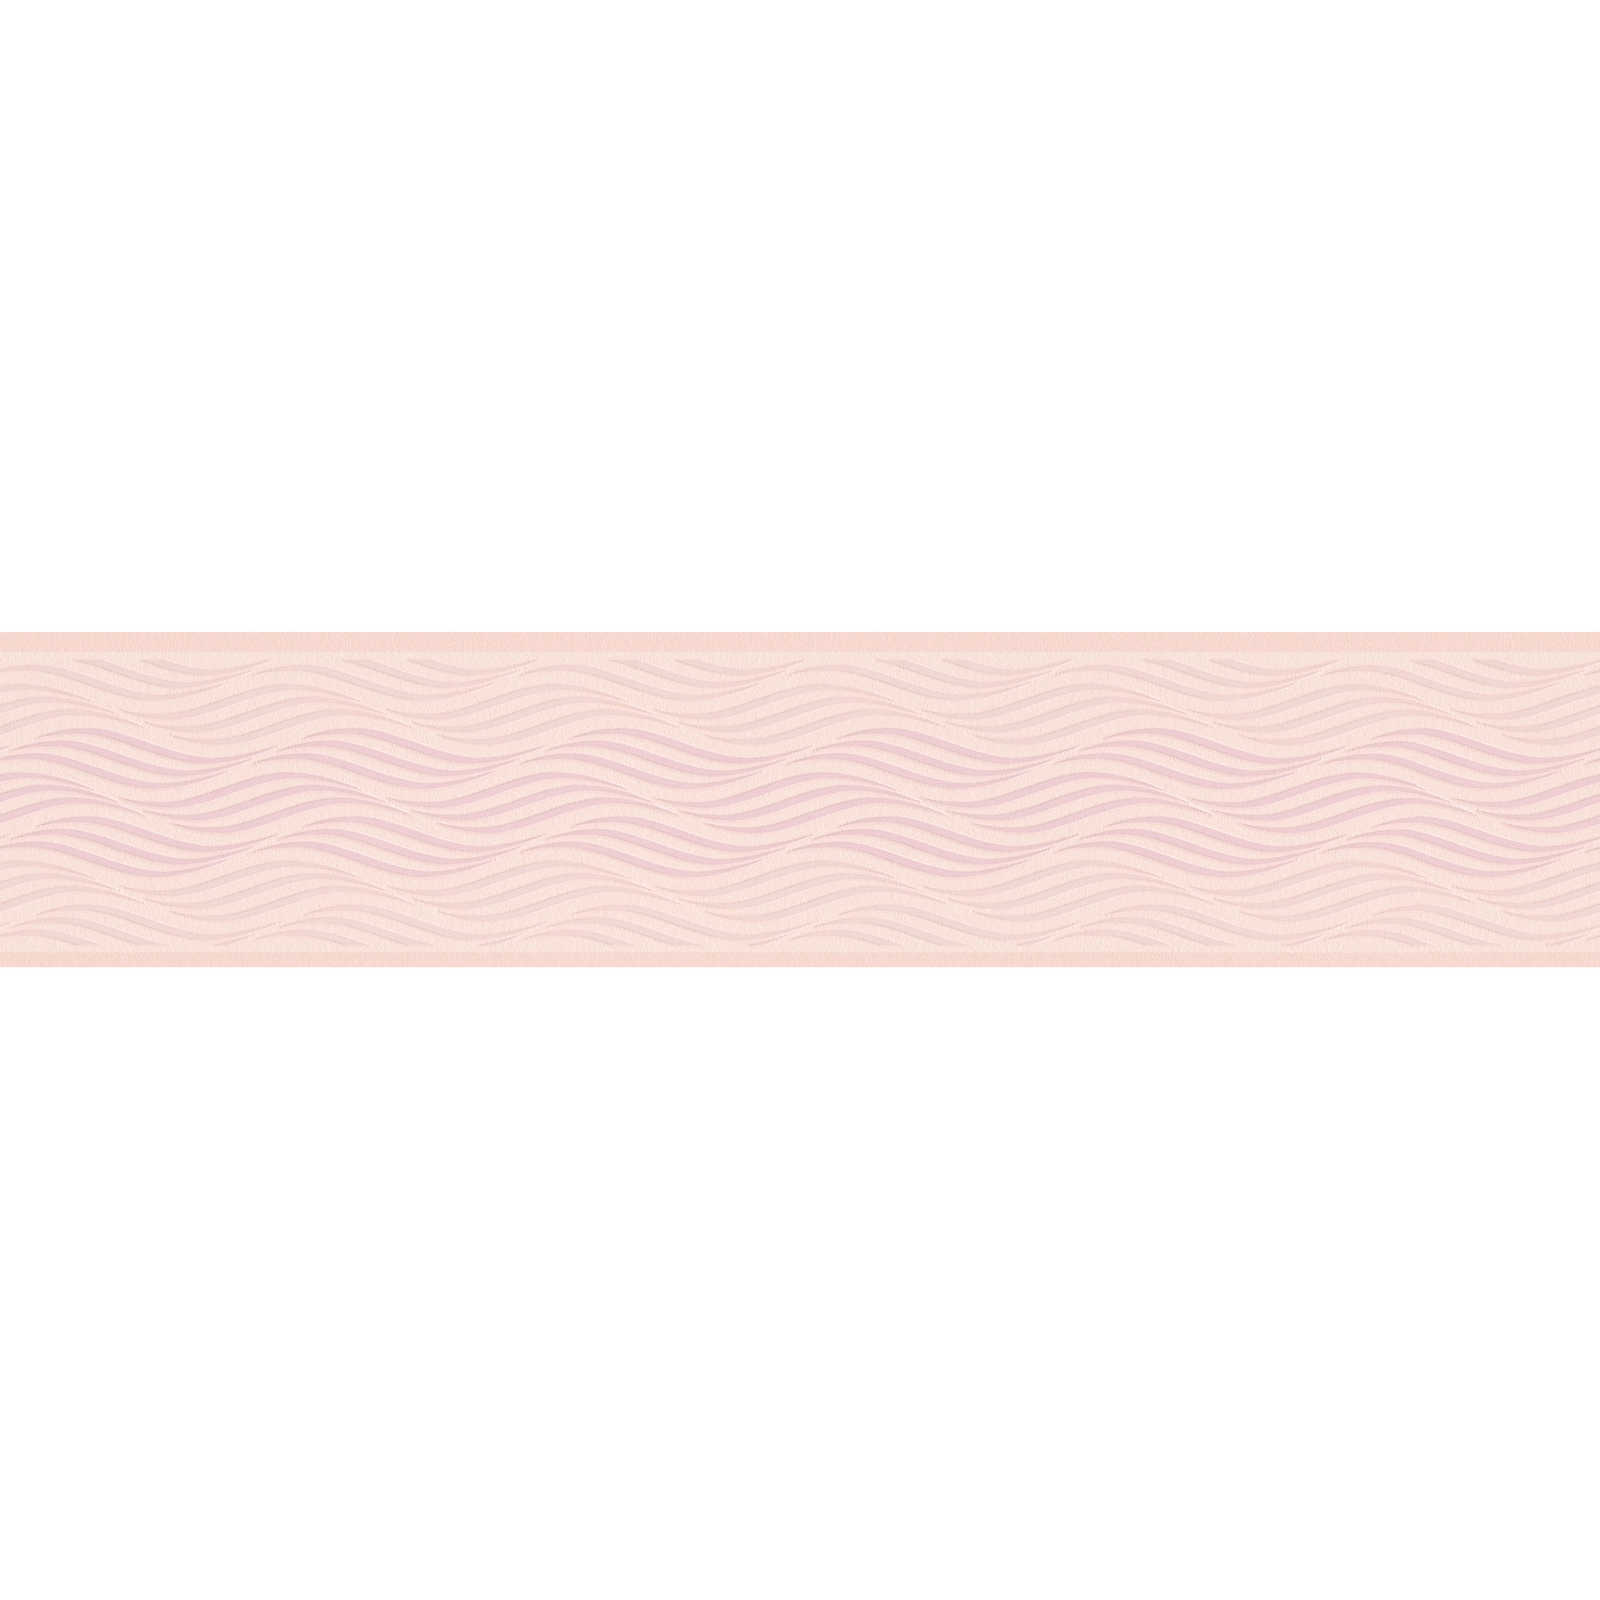         Border with glitter effect & wave pattern - white, pink
    